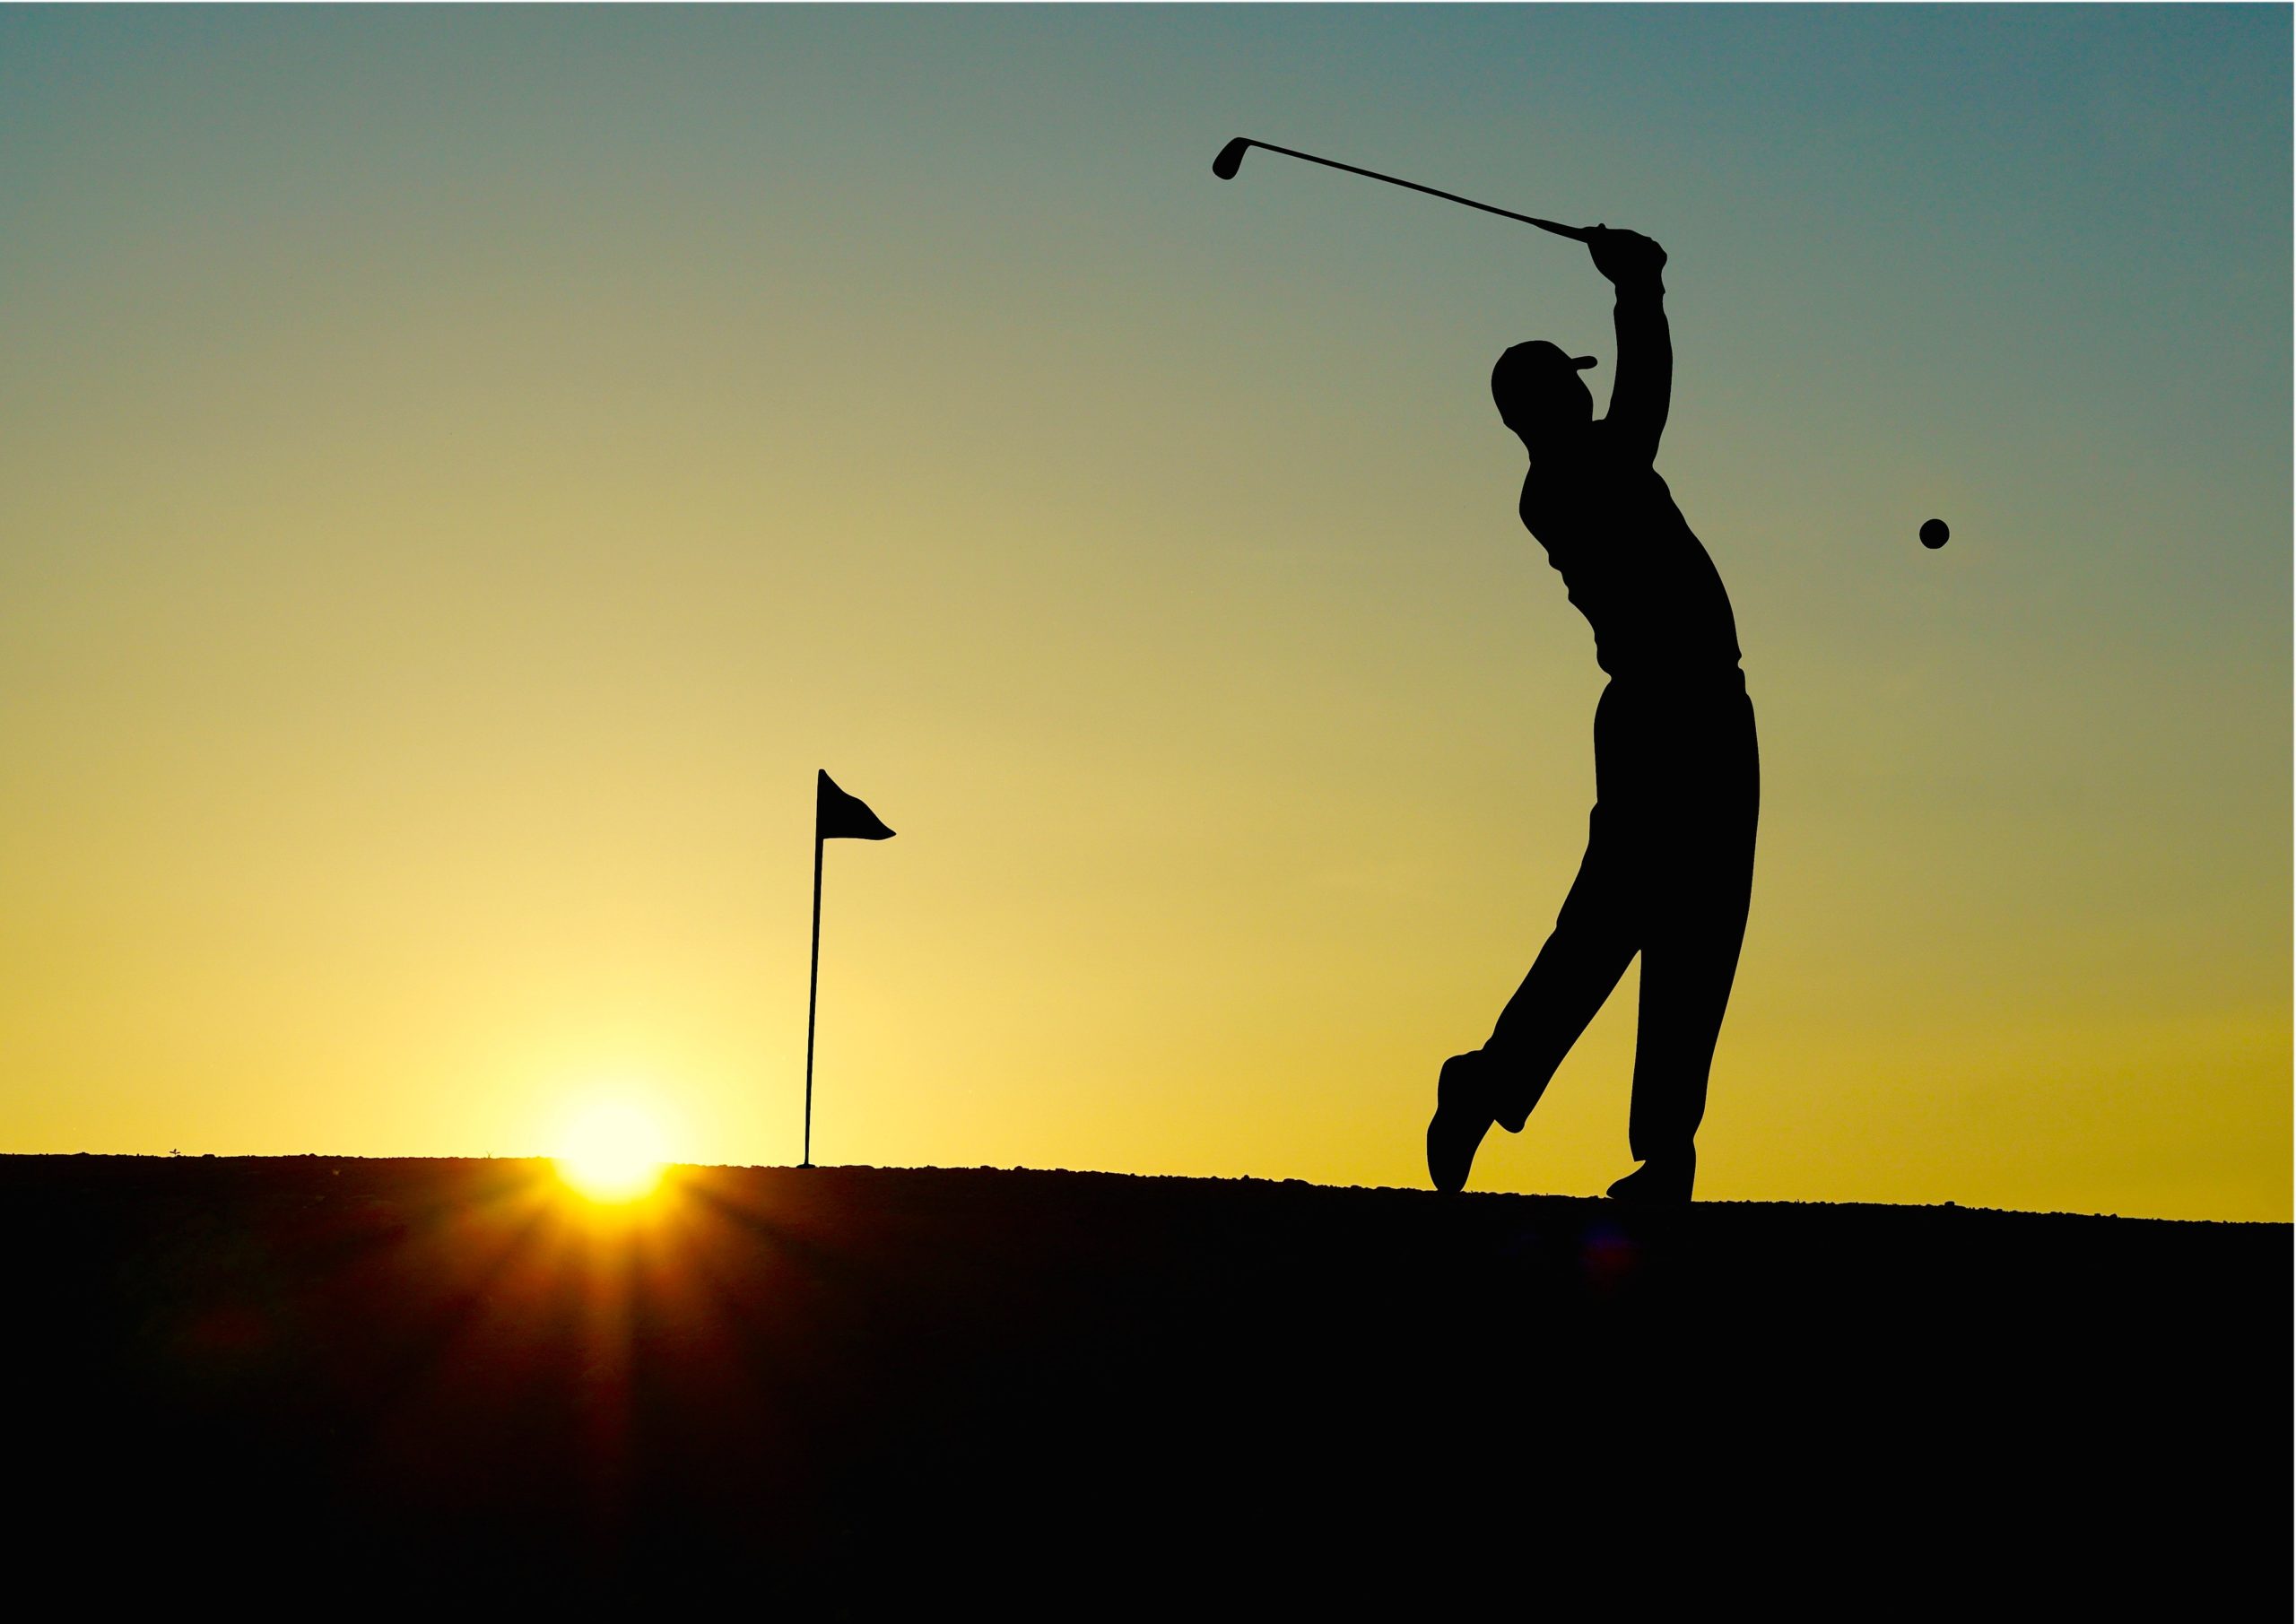 the silhouette of a man playing golf during sunset